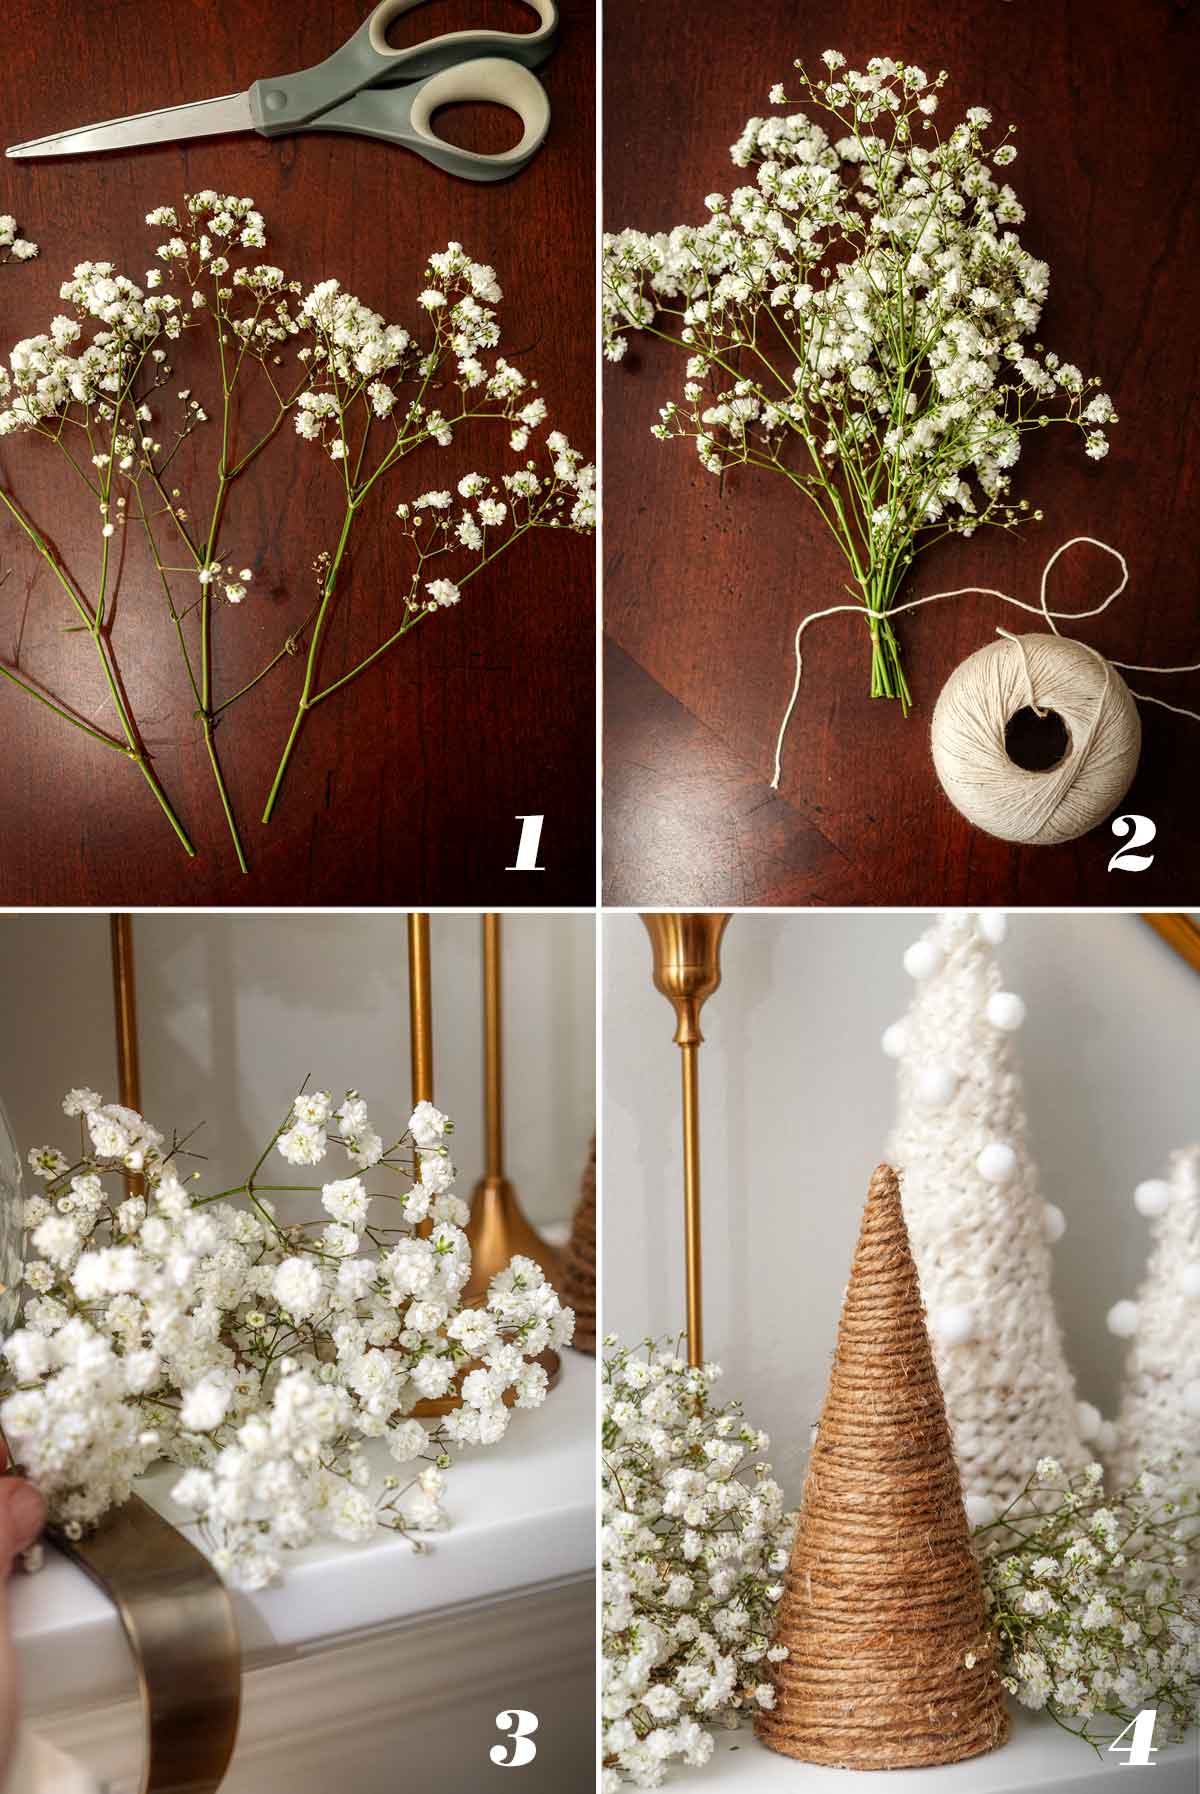 A collage of 4 numbered images showing how to add baby's breath to a mantle.